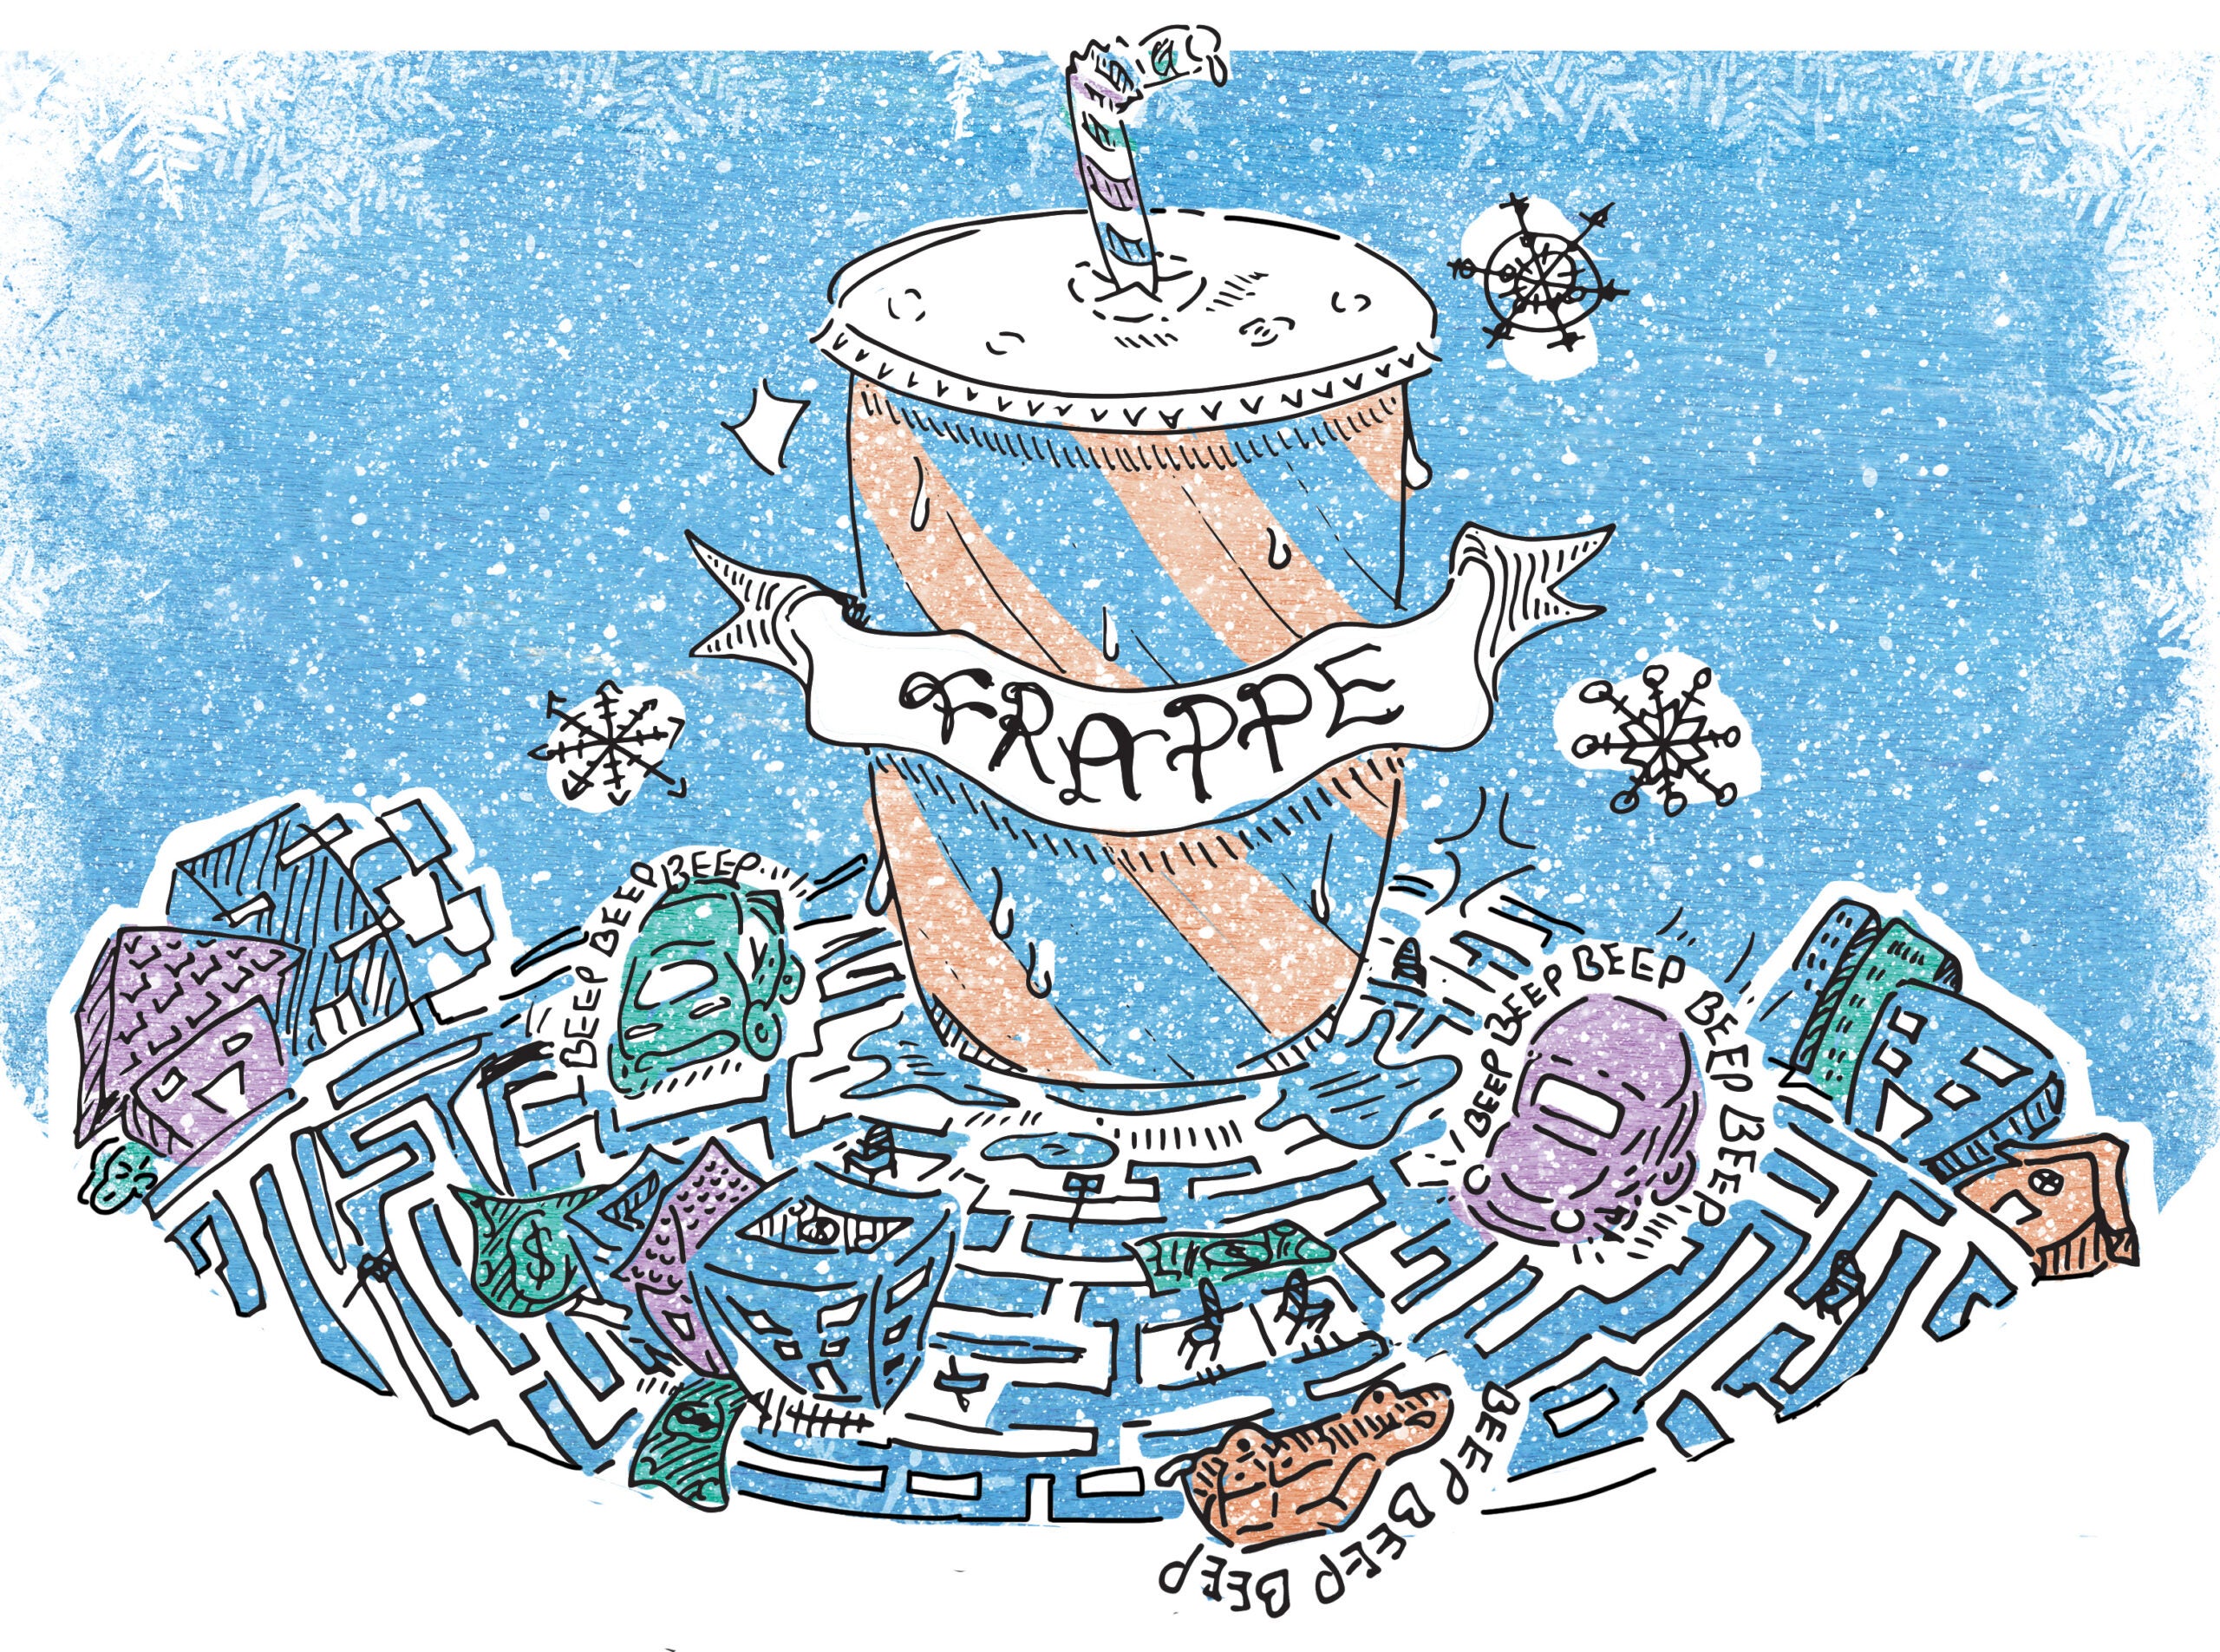 An illo of a blue- and orange-striped cup with a straw and a frappe banner sits in the middle of a maze of honking cars and city buildings adorned with money. Snowflakes are falling in a very blue, wintry sky.